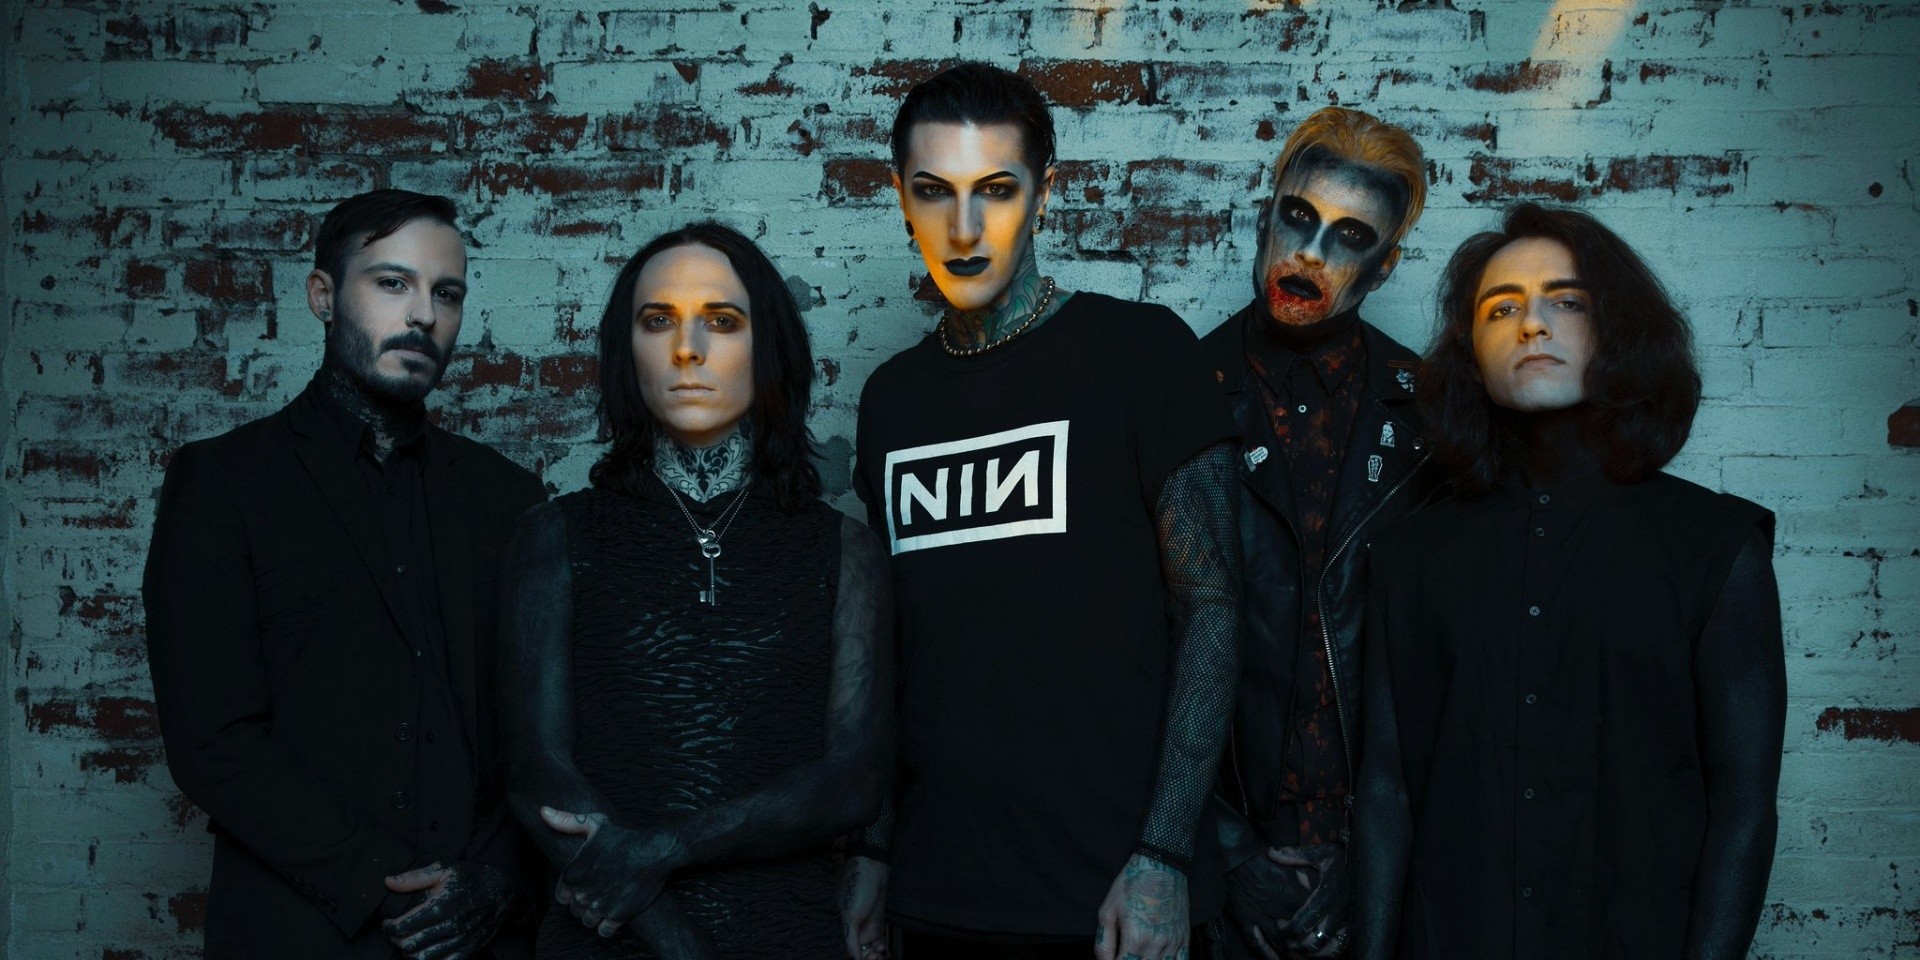 Motionless In White releases fifth studio album, Disguise – listen